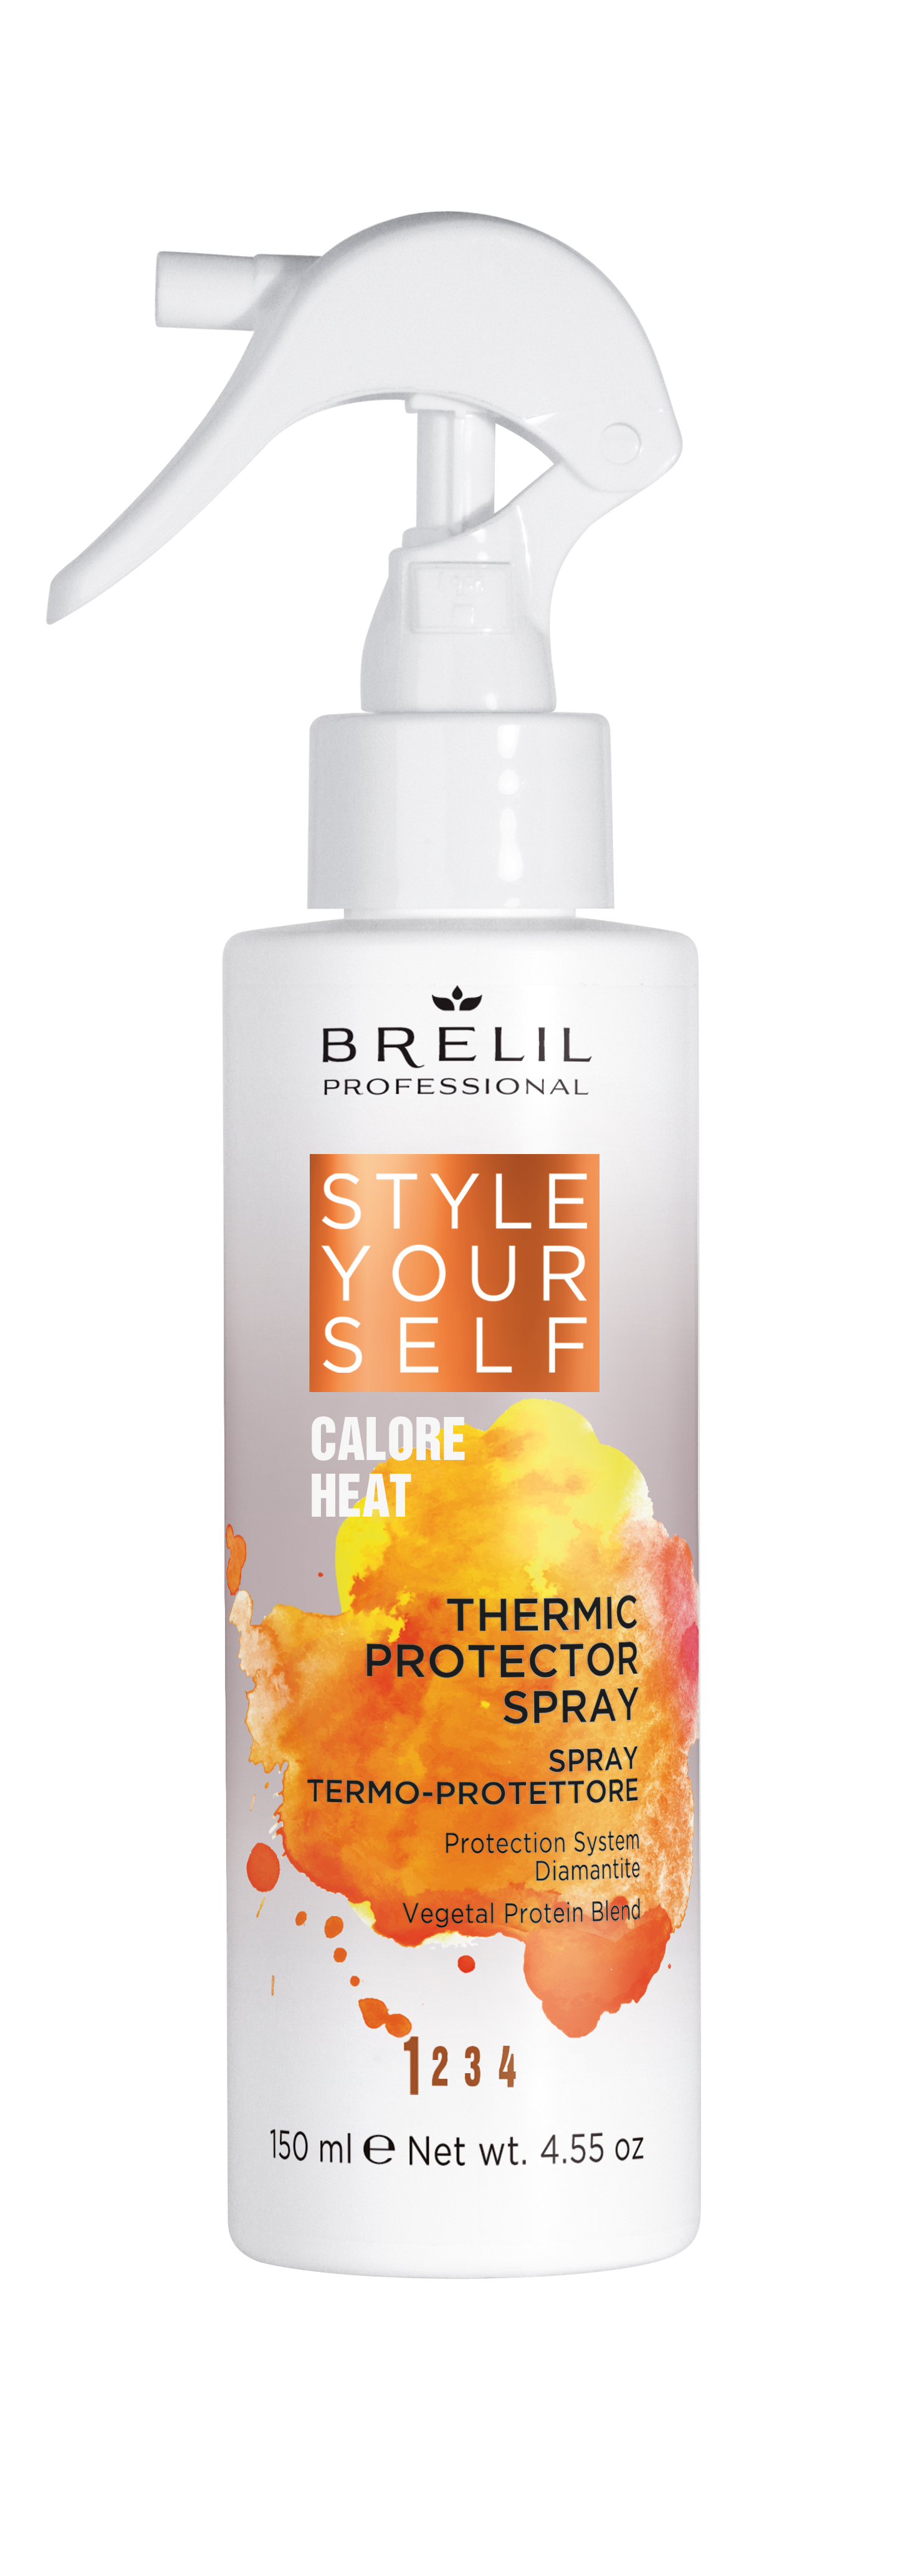 STYLE YOURSELF HEAT THERMIC PROTECTOR SPRAY